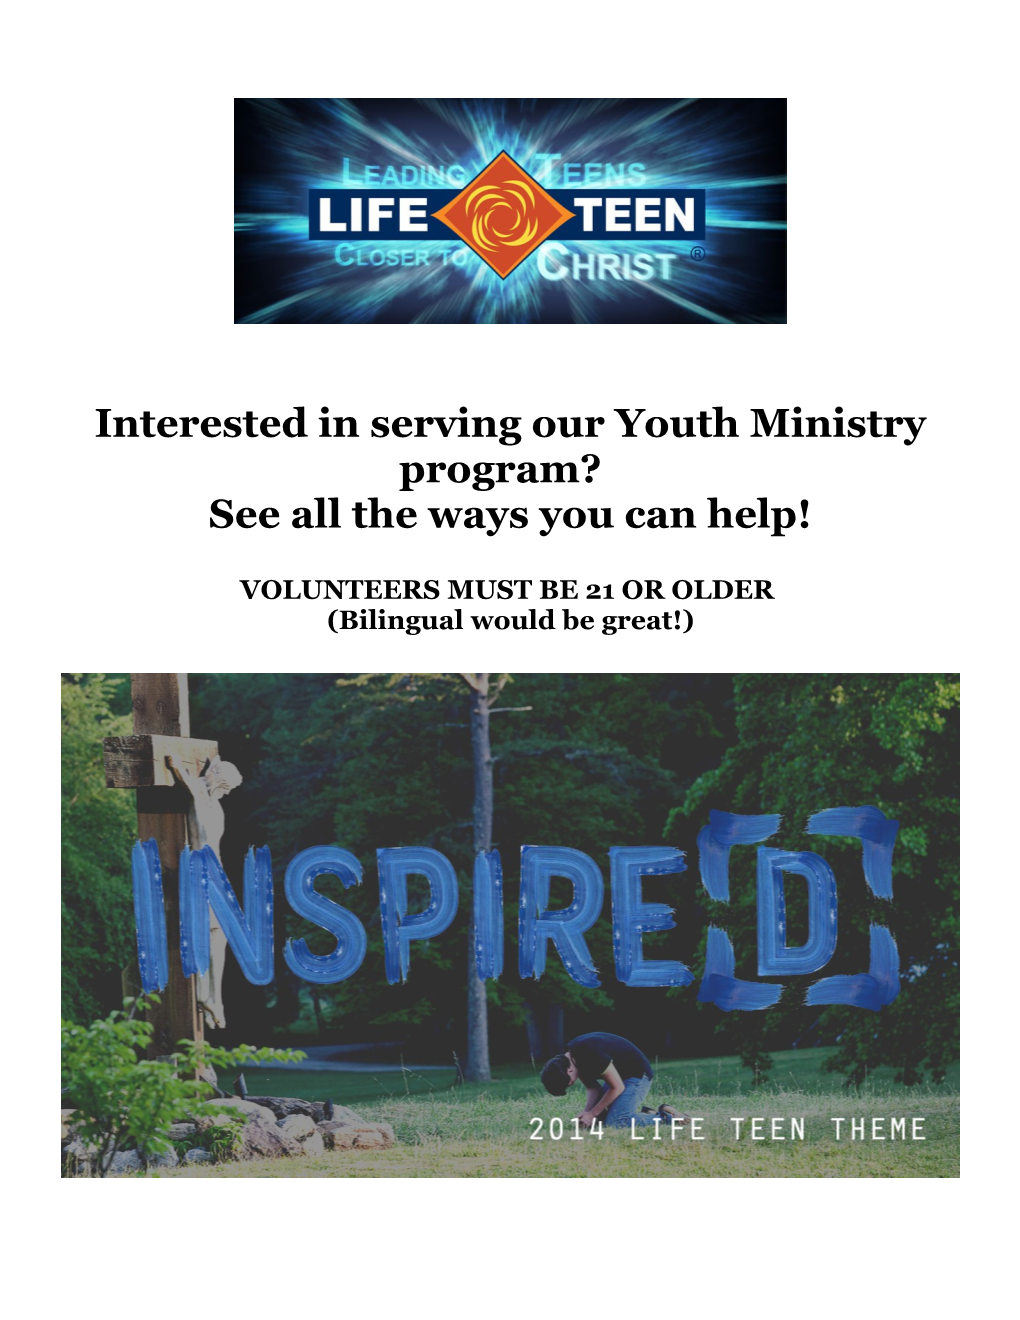 Interested in Serving Our Youth Ministry Program?